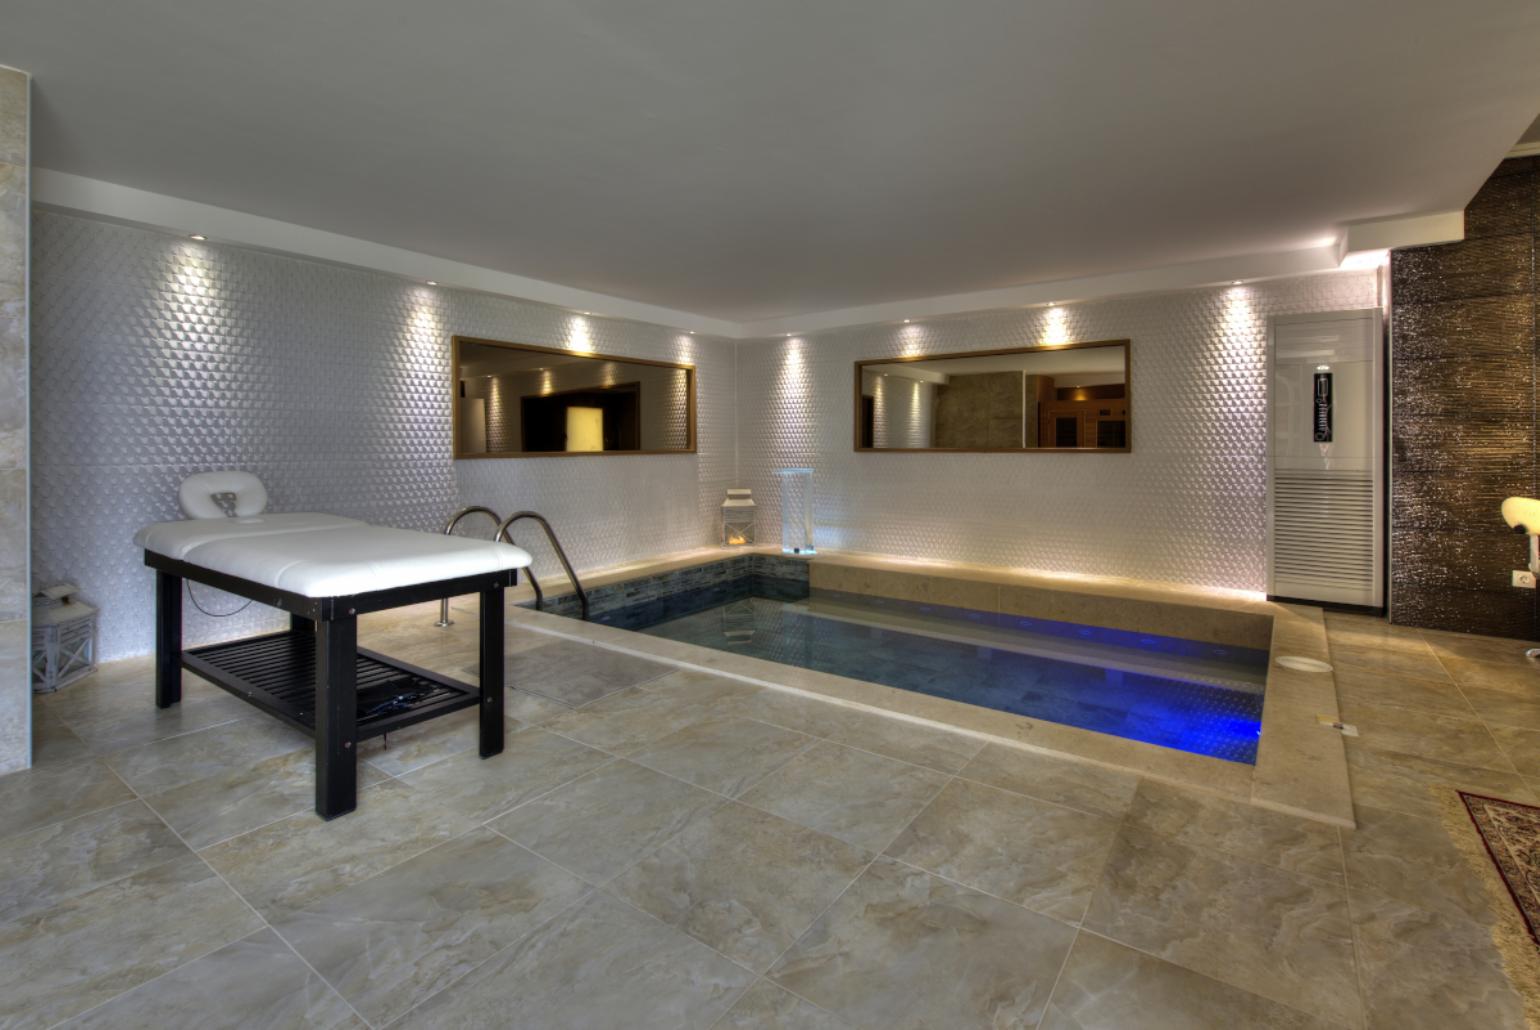 Spa area with massage table and pool